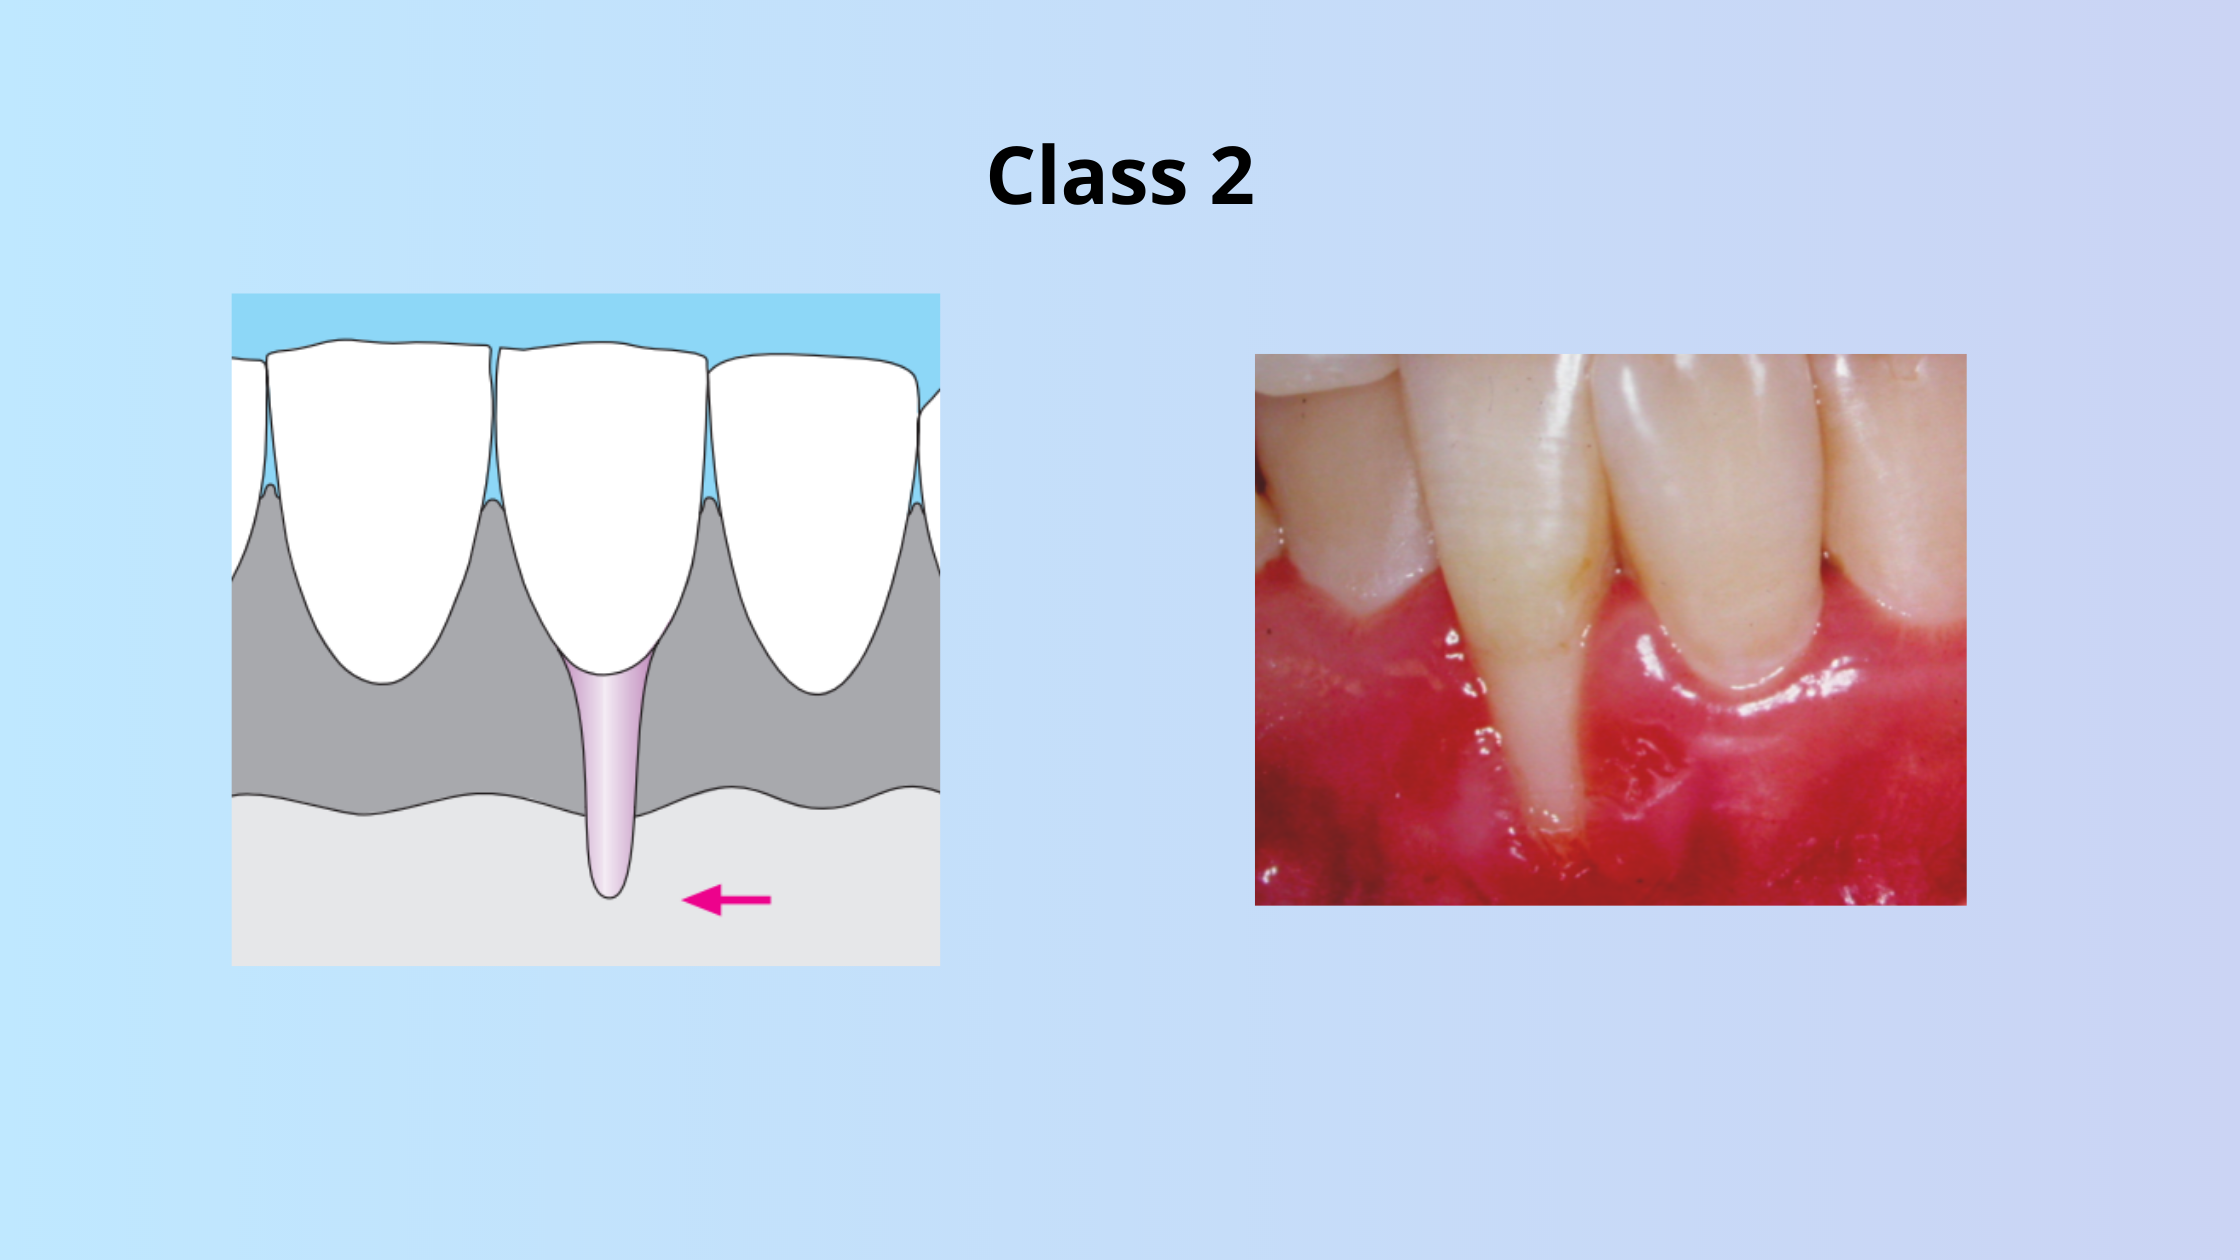 Class 2 of gingival recession according to Miller